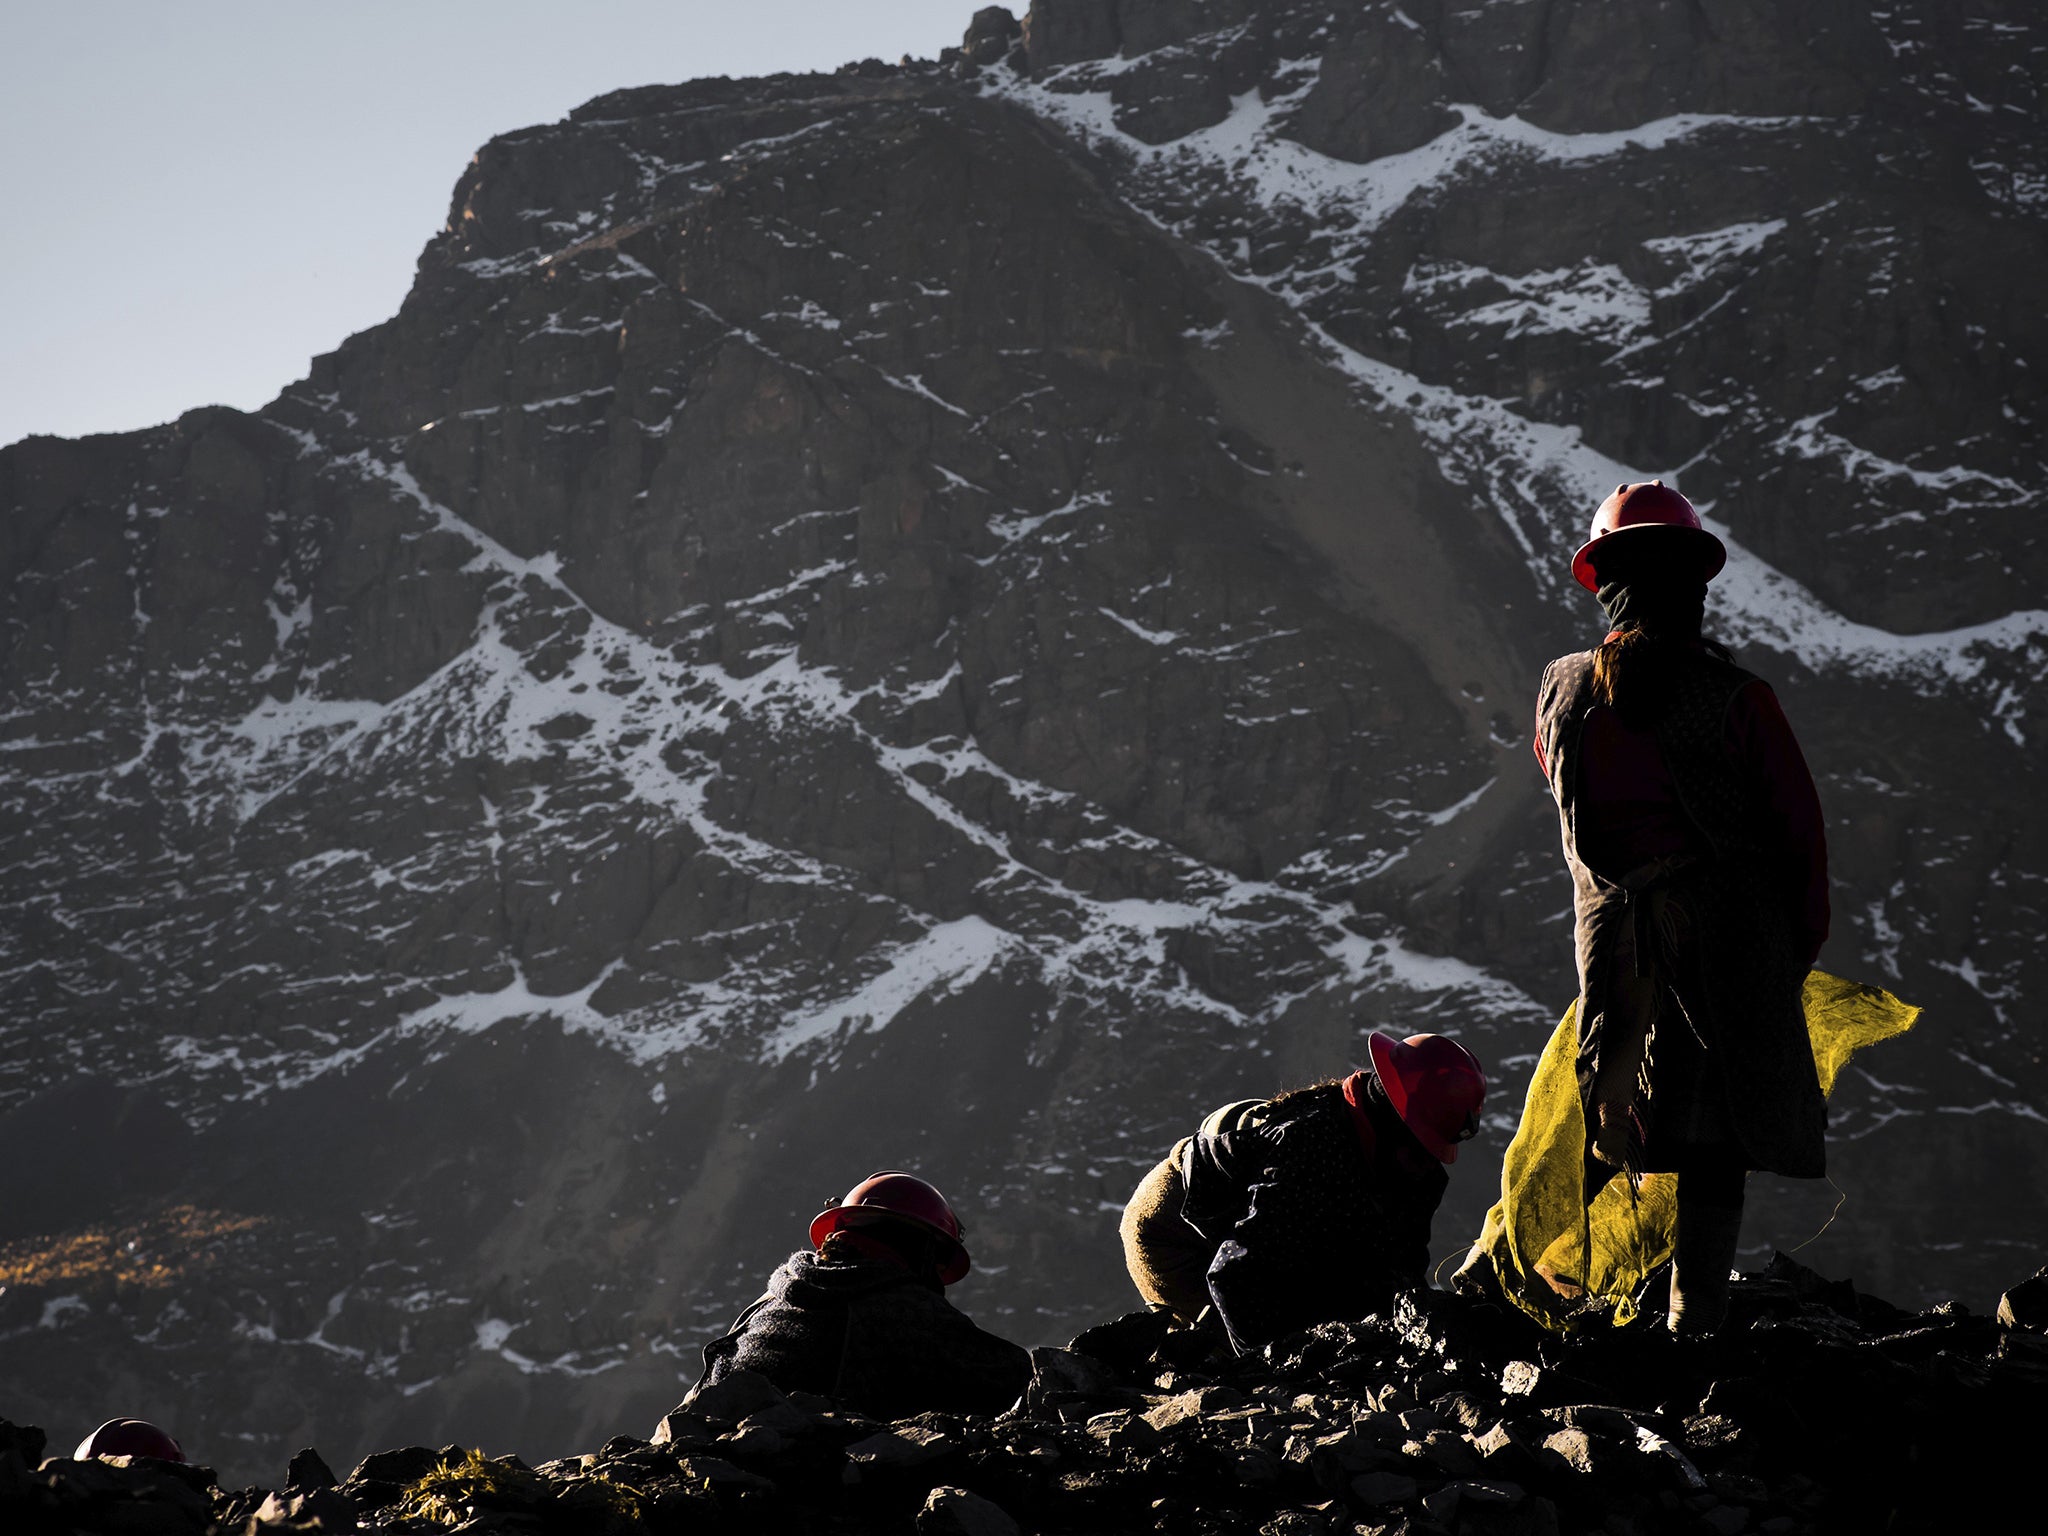 Women miners search for gold on waste rock from mines in La Rinconada, Peru